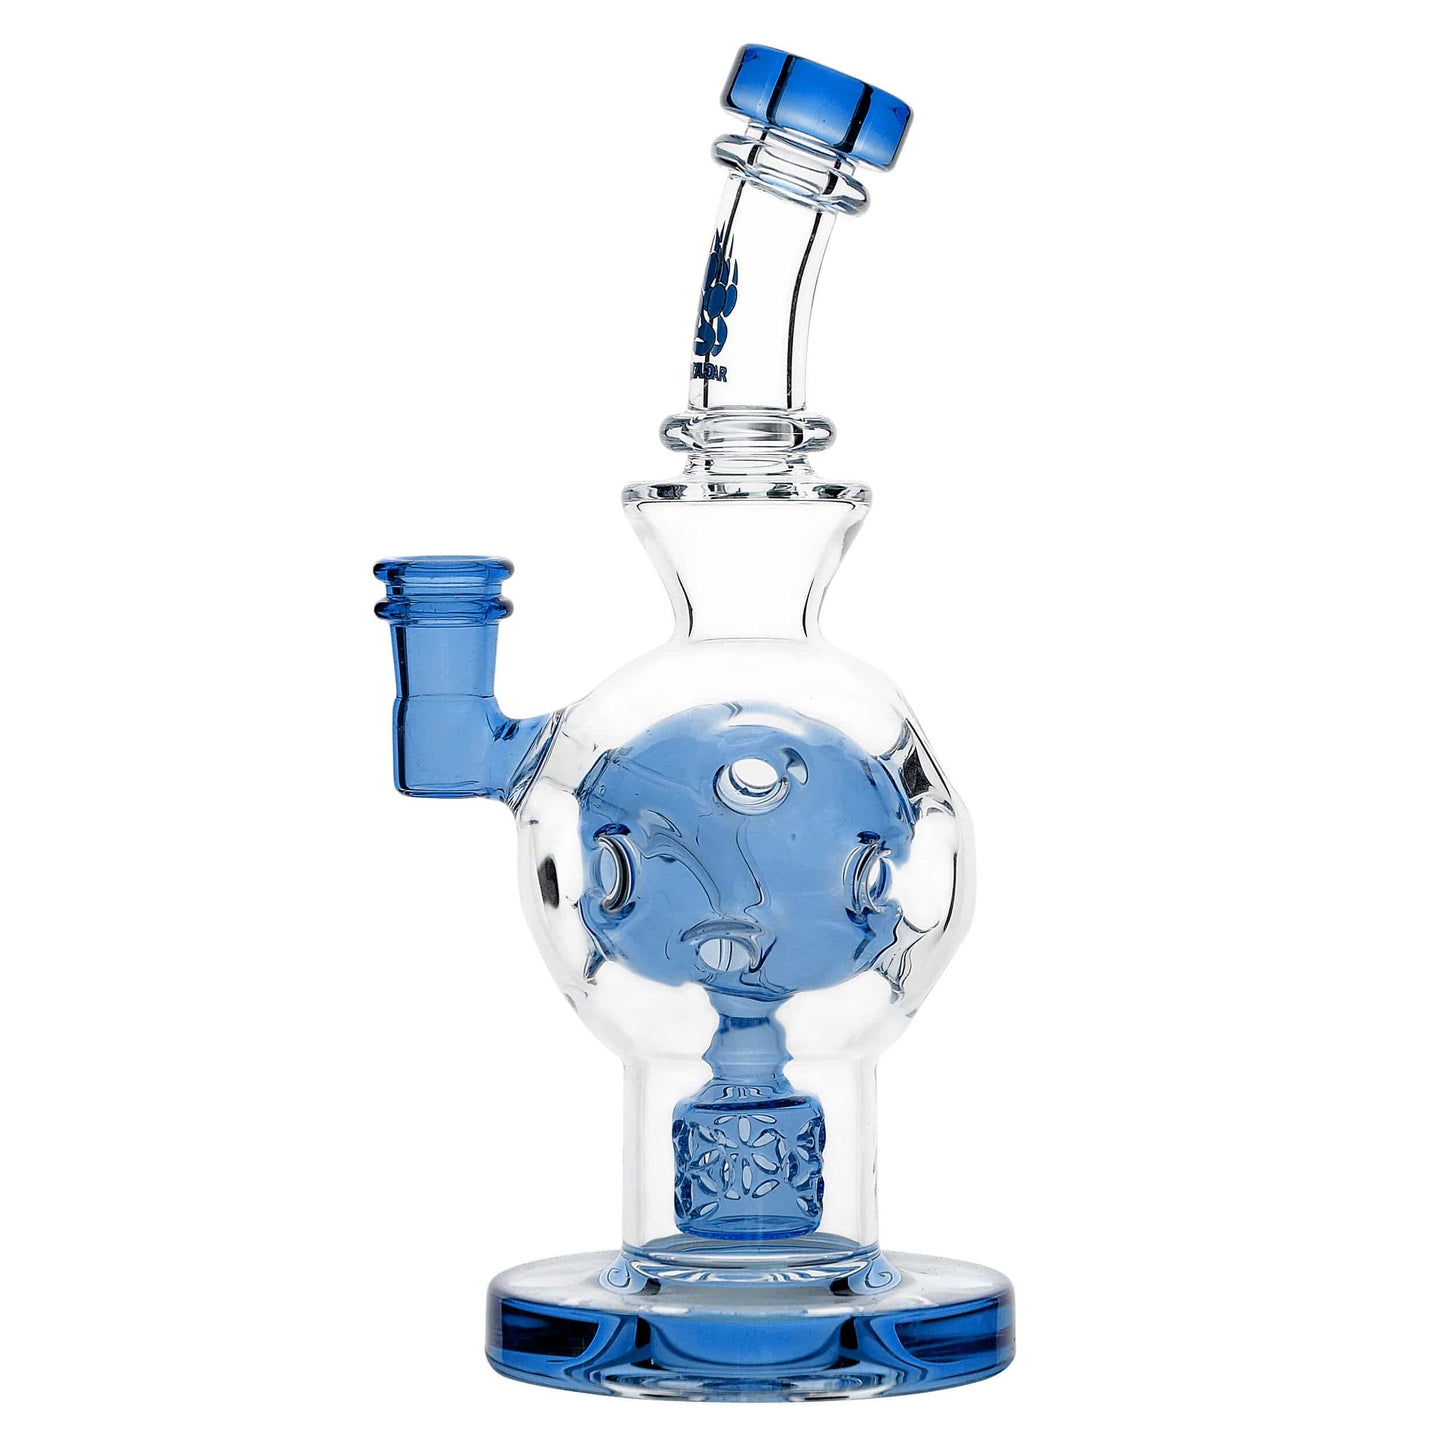 calibearofficial DAB RIG Violet Blue / 8 inch EXOSPHERE